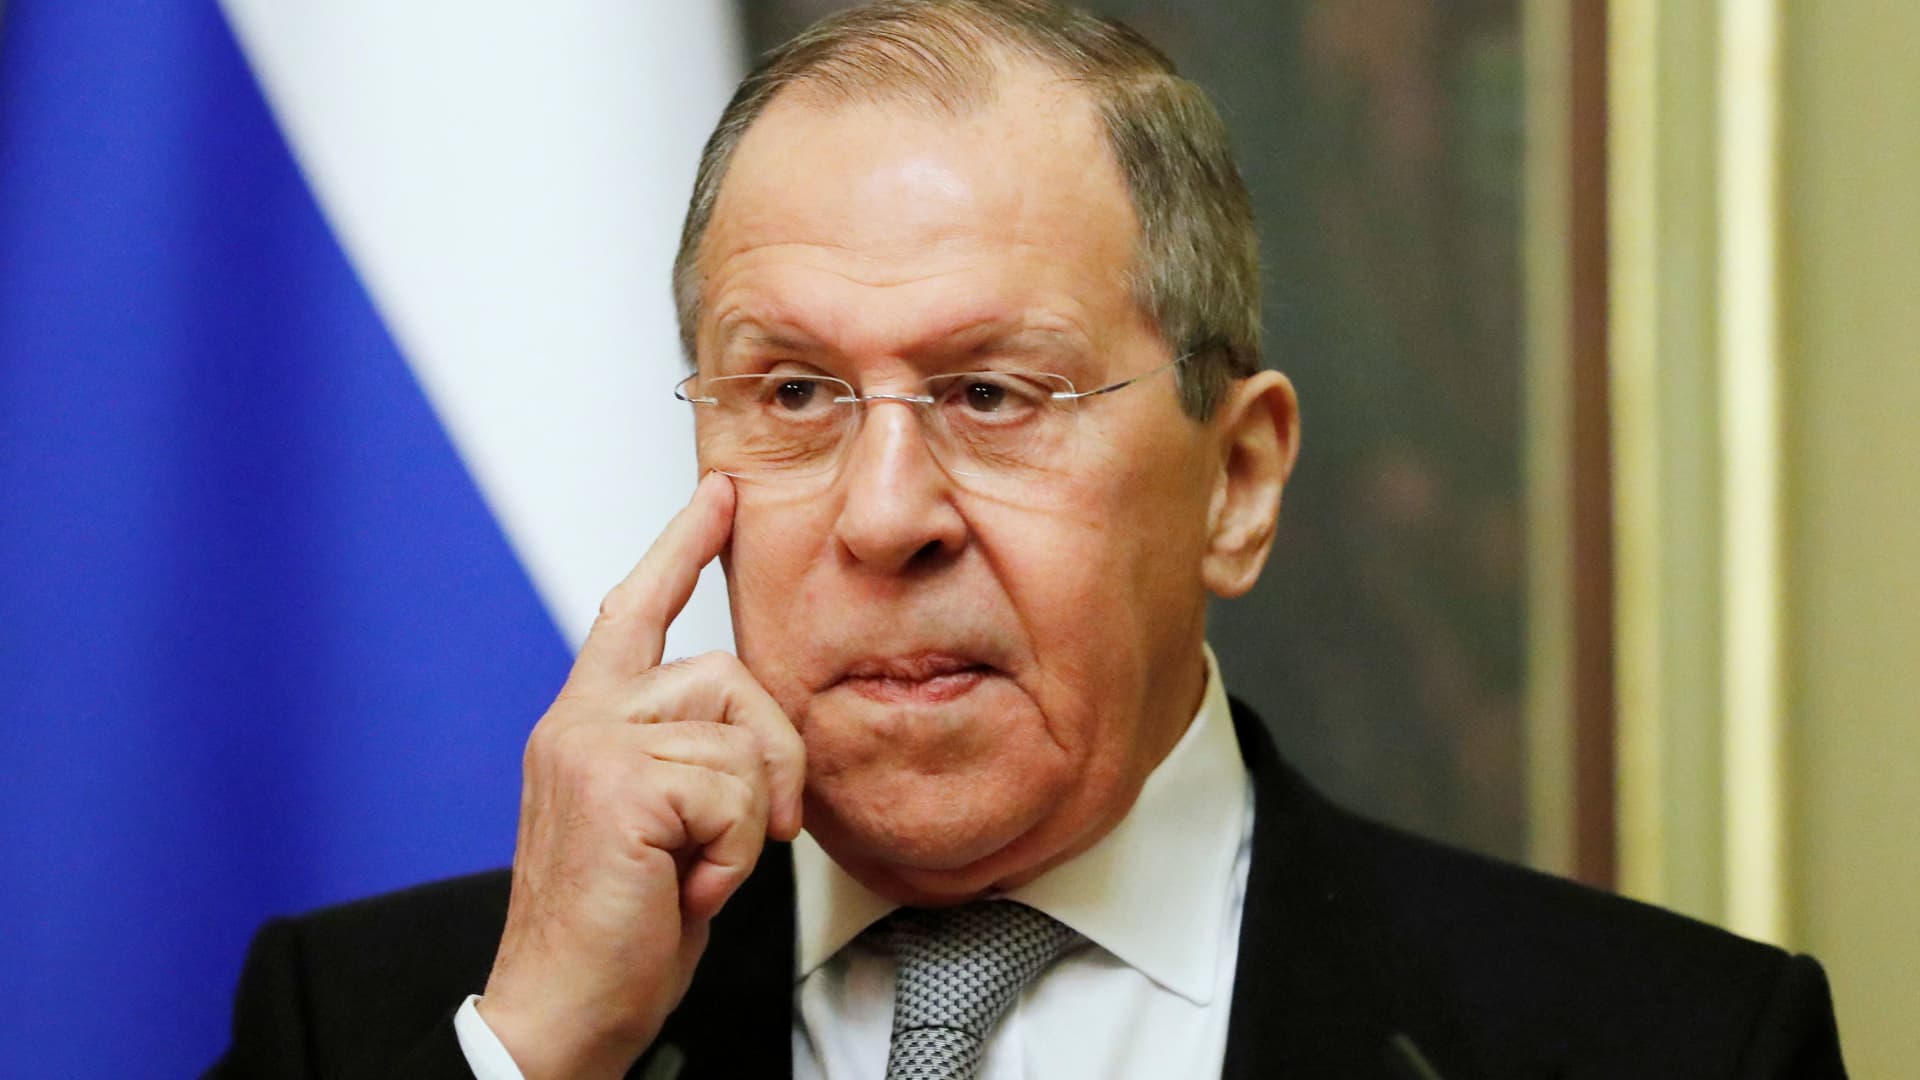 Russia's Foreign Minister Sergei Lavrov attends a joint news conference with OSCE Chairman-in-Office, Poland's Minister for Foreign Affairs Zbigniew Rau in Moscow, Russia February 15, 2022.